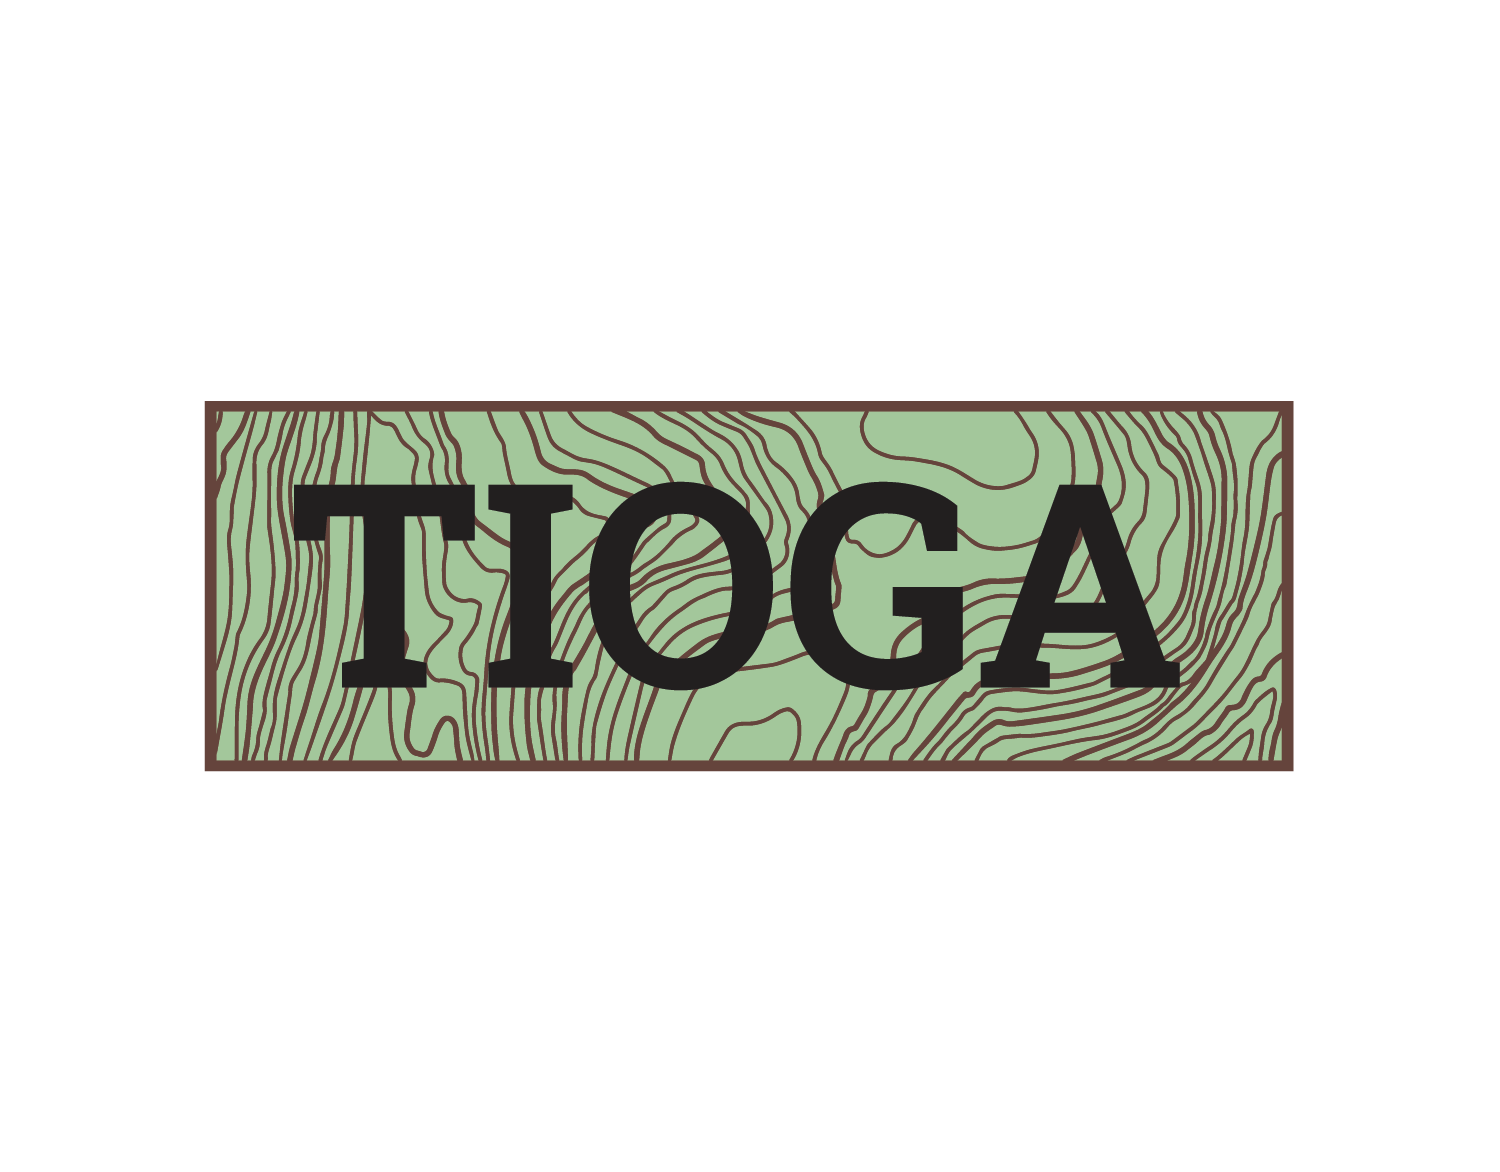 Tioga is the word this logo has. It's written in a dark brown, bold, 
				serif slab font. It's enclosed in a rectangle containing a background 
				styled similar to a topological map. The borders of the rectangle are a 
				lighter shade of brown, and the same applies to the many curvy lines in 
				the rectangle's background. Further topping off the topography map look is
				the fact the background of the rectangle has a light, dull shade of green.